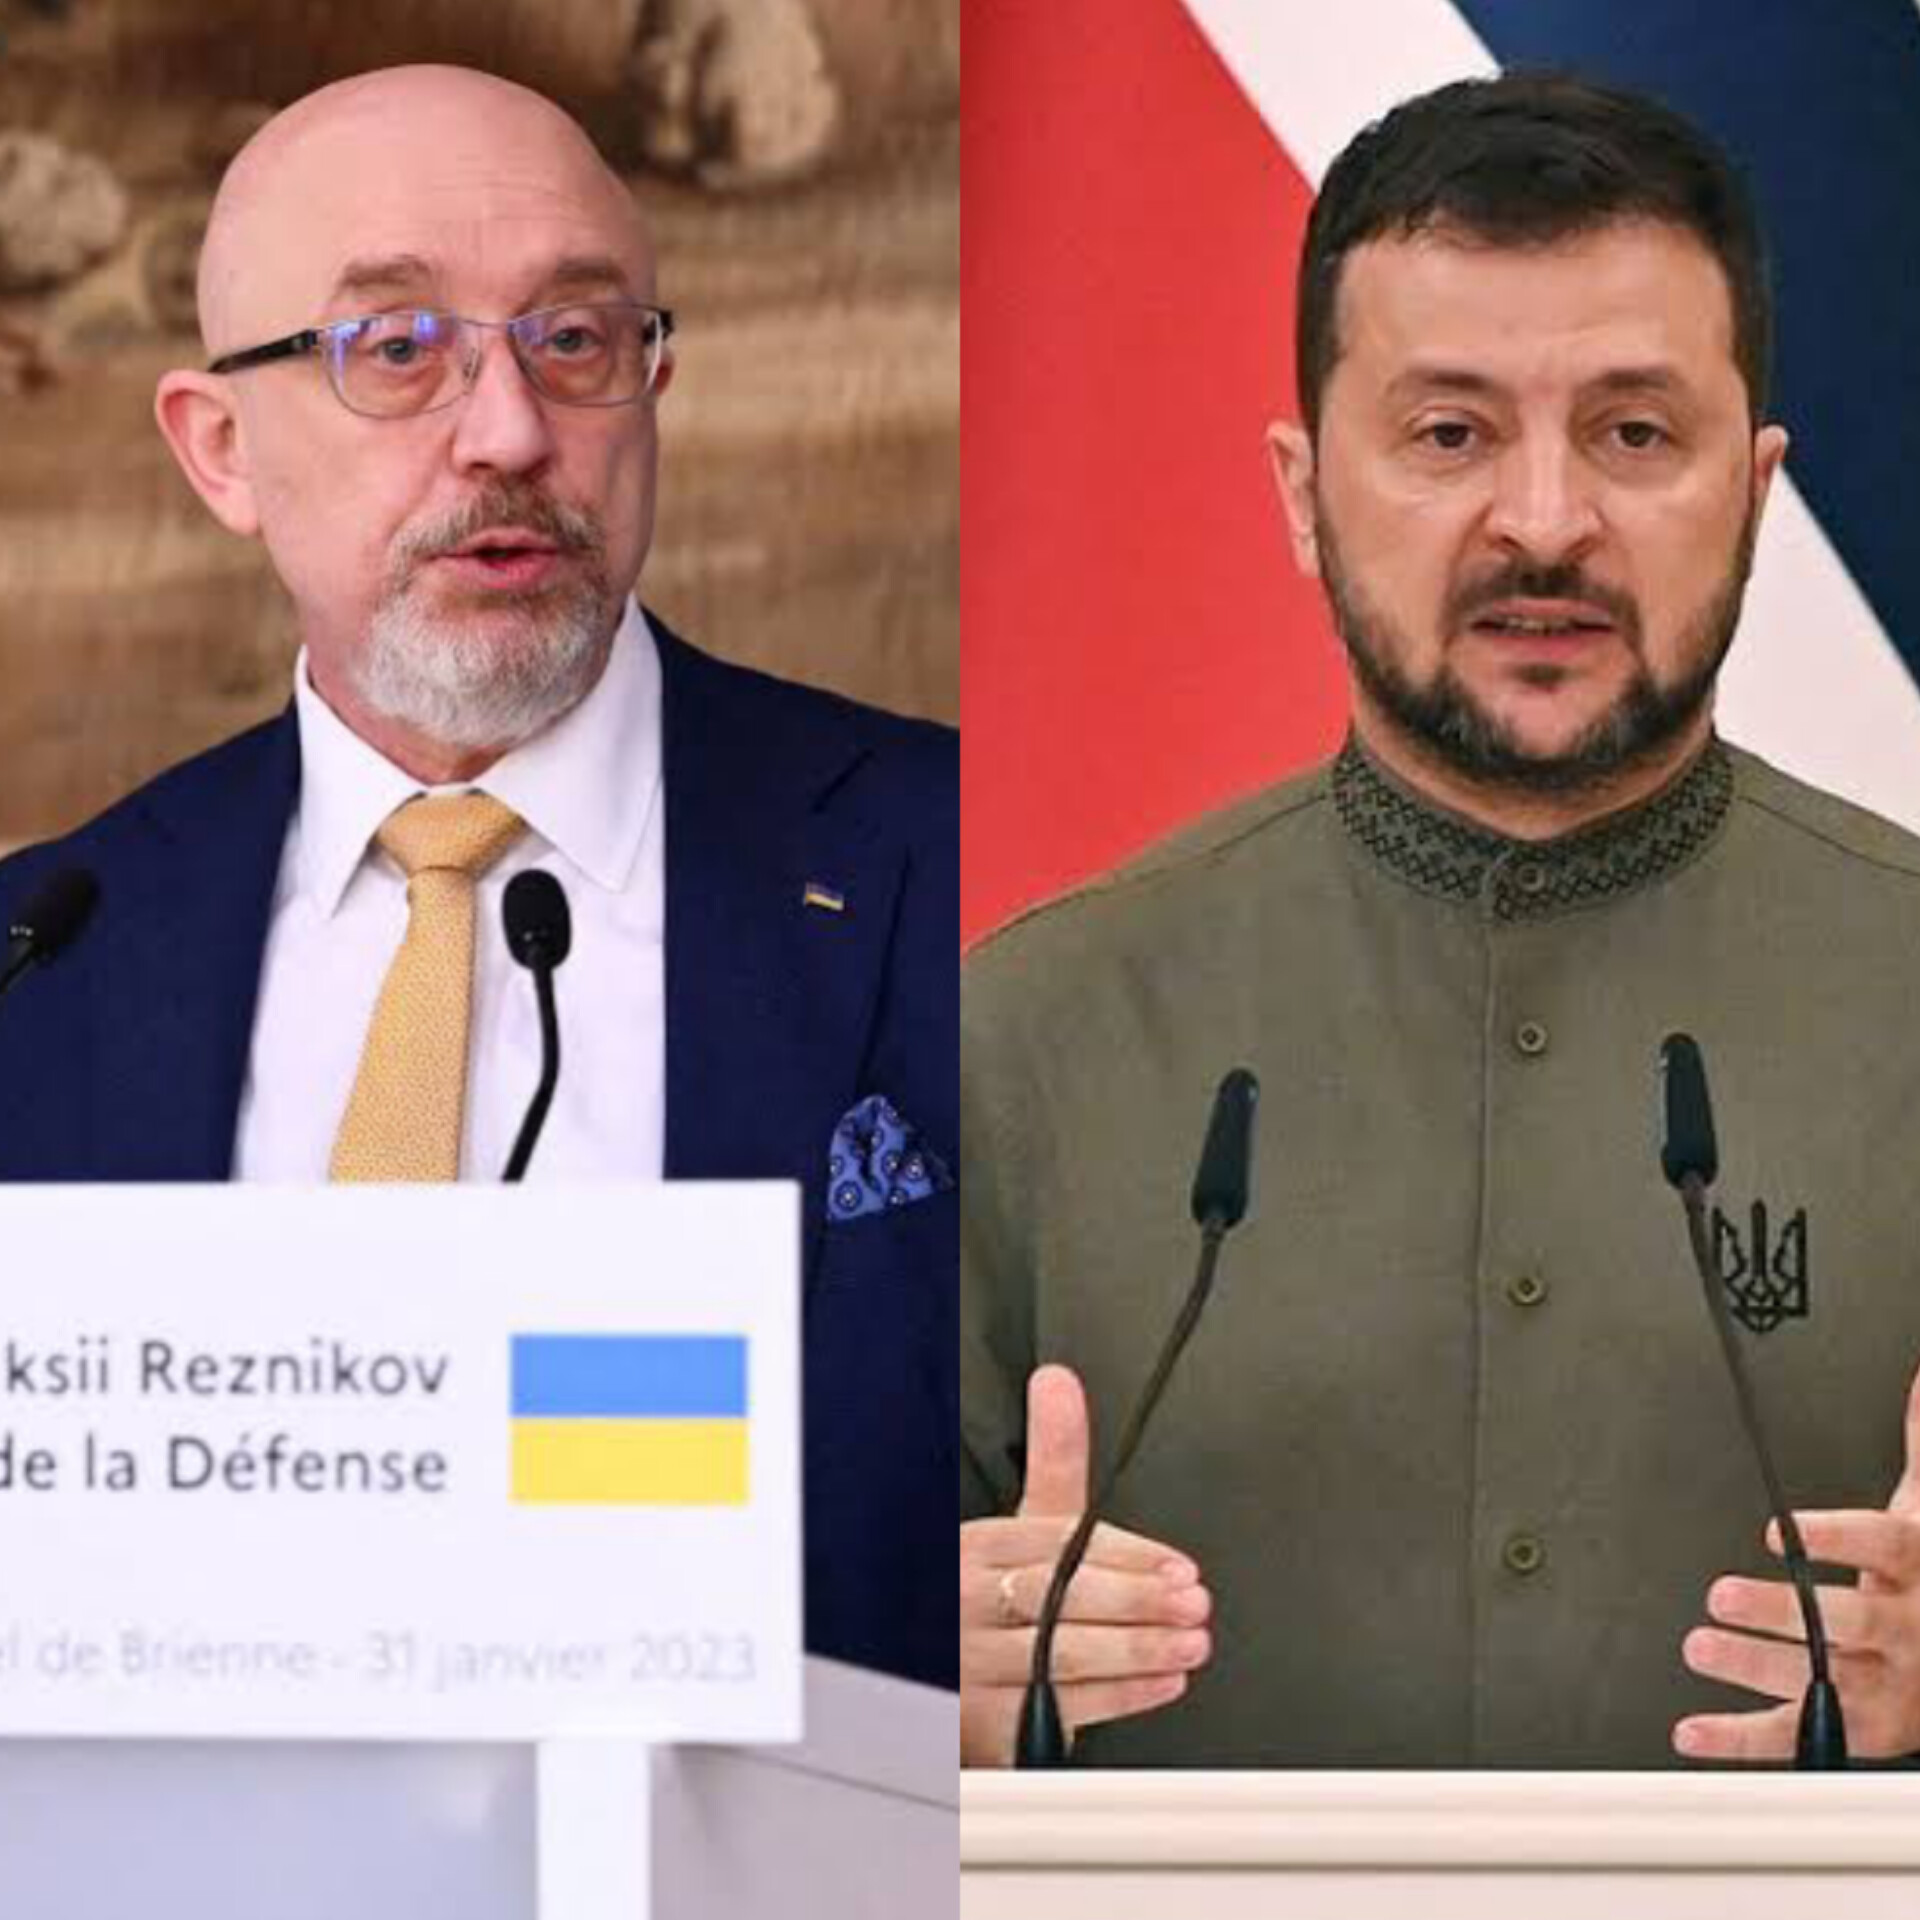 'We need new approaches' - President Zelensky fires his defence minister after 552 days of war